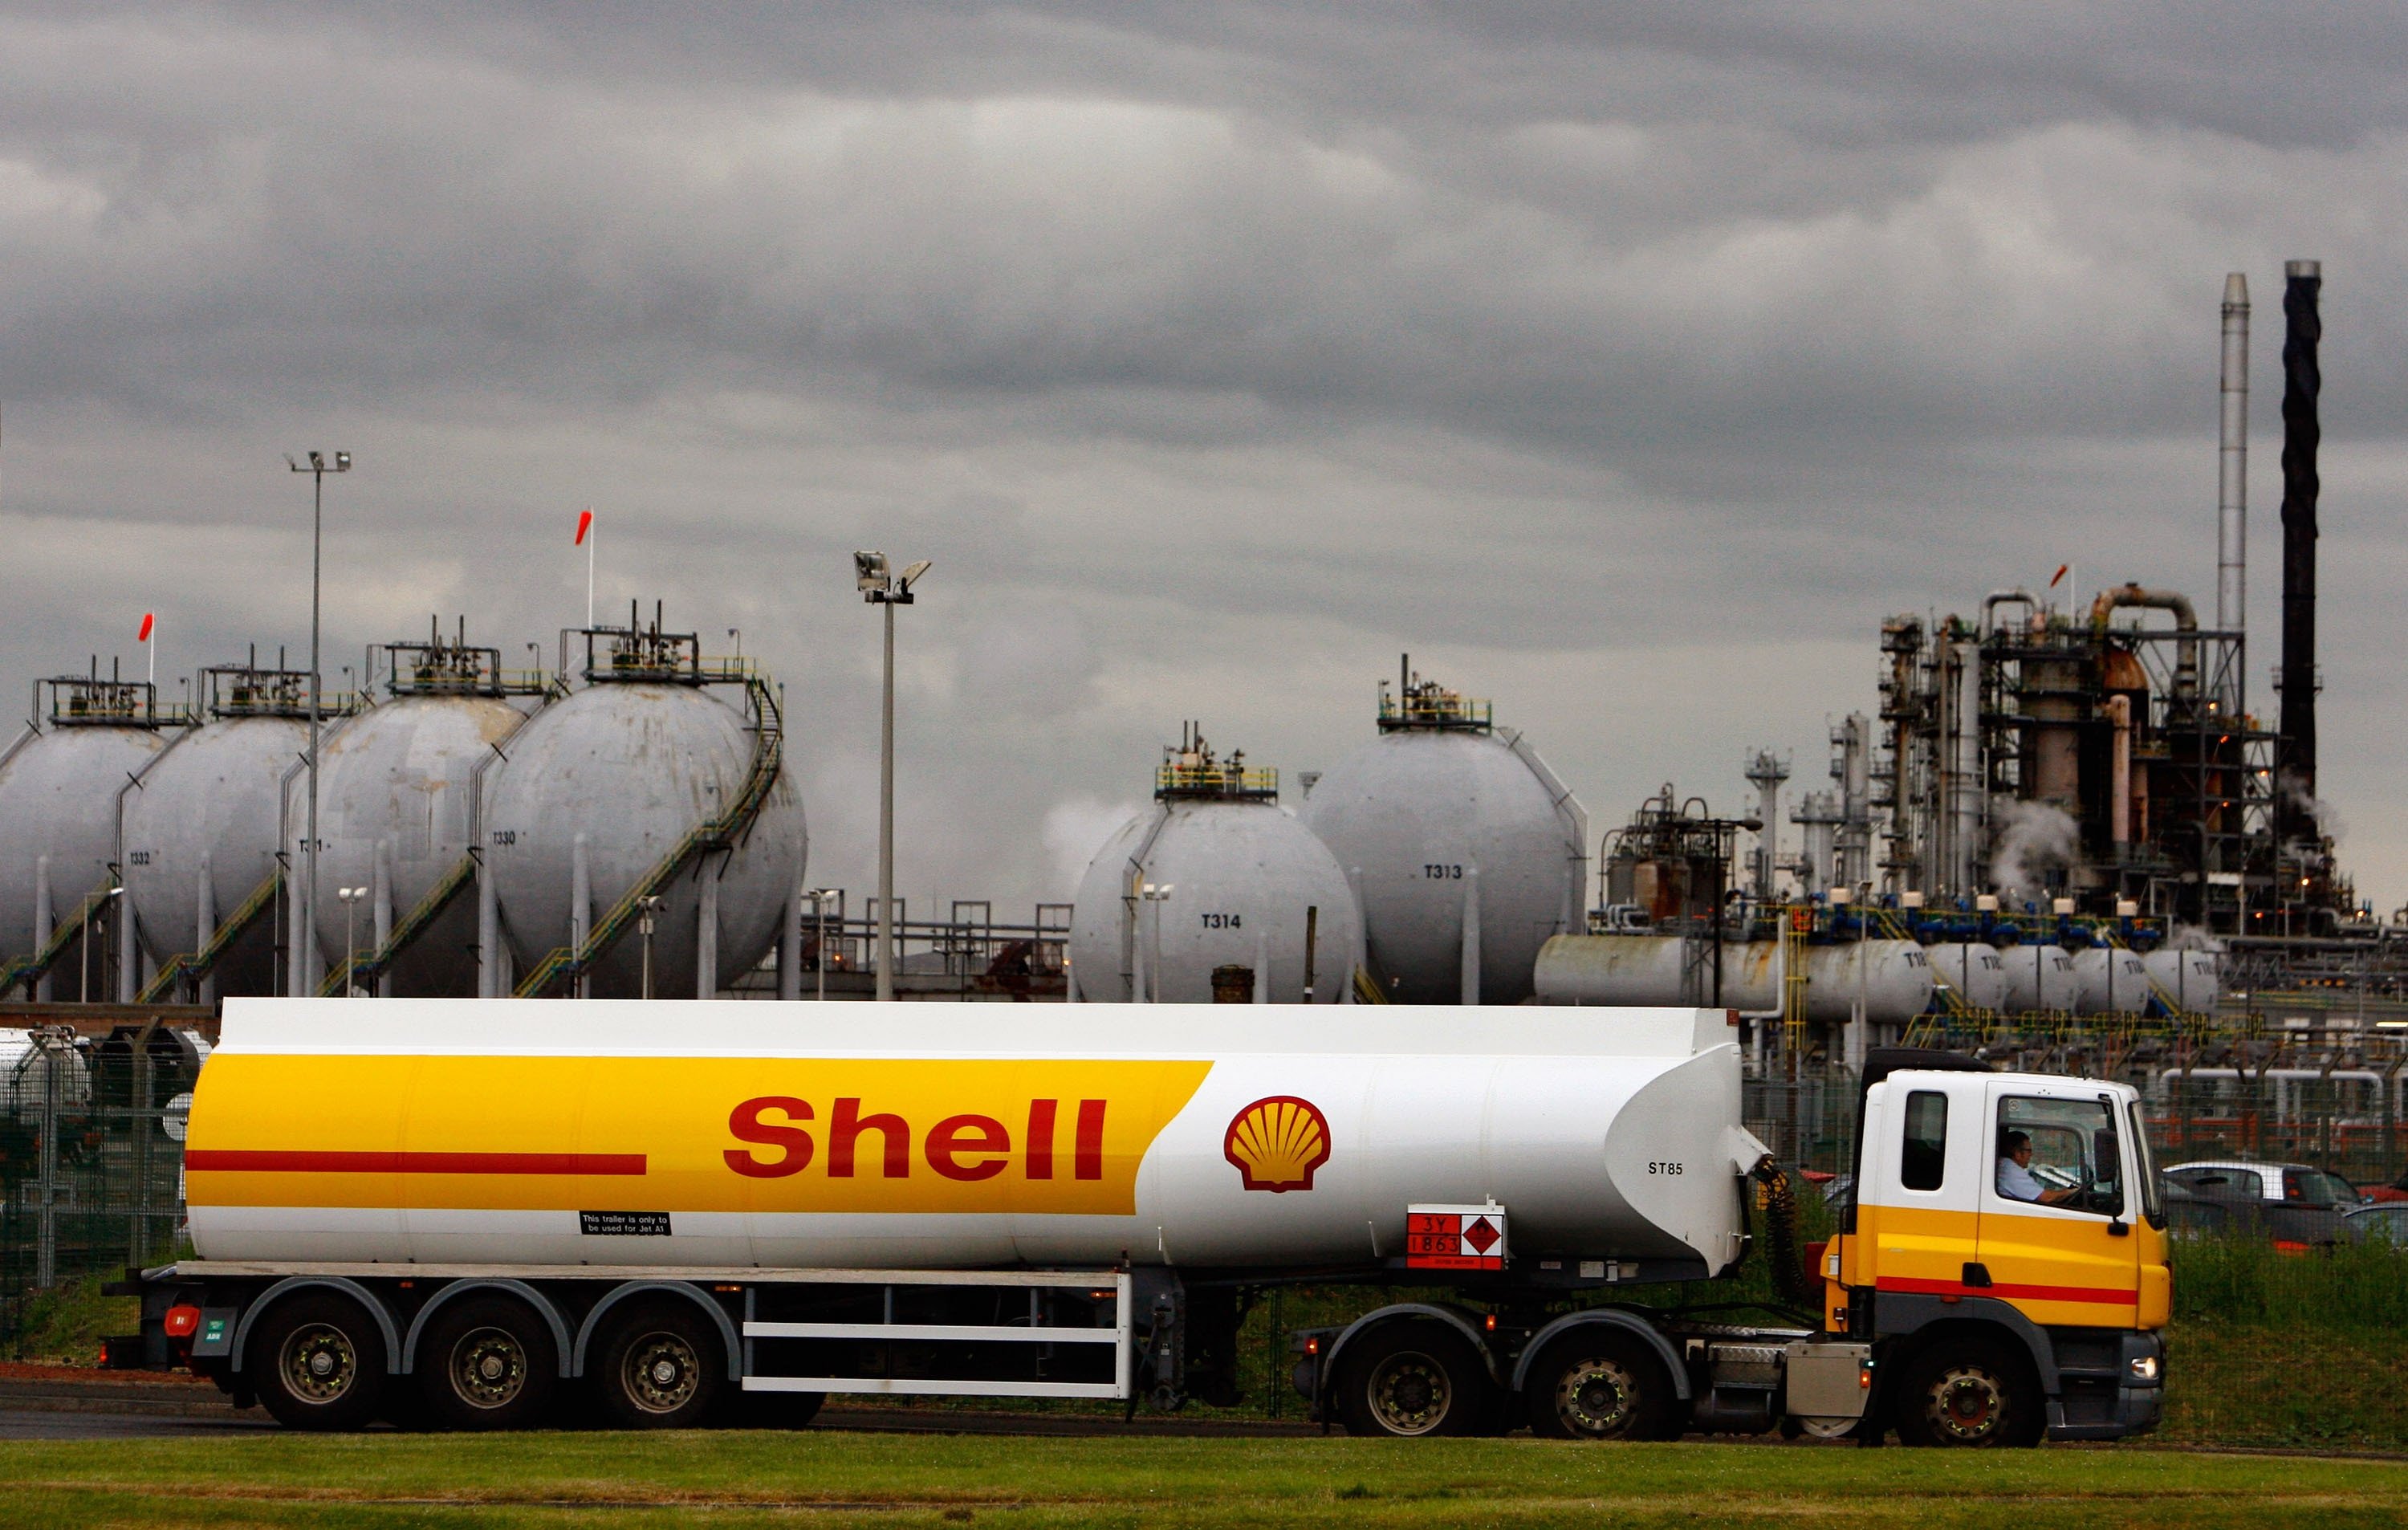 Tanker drivers working for Shell return to work after a four-day strike, in Grangemouth, Scotland, June 17, 2008. (Getty Images)